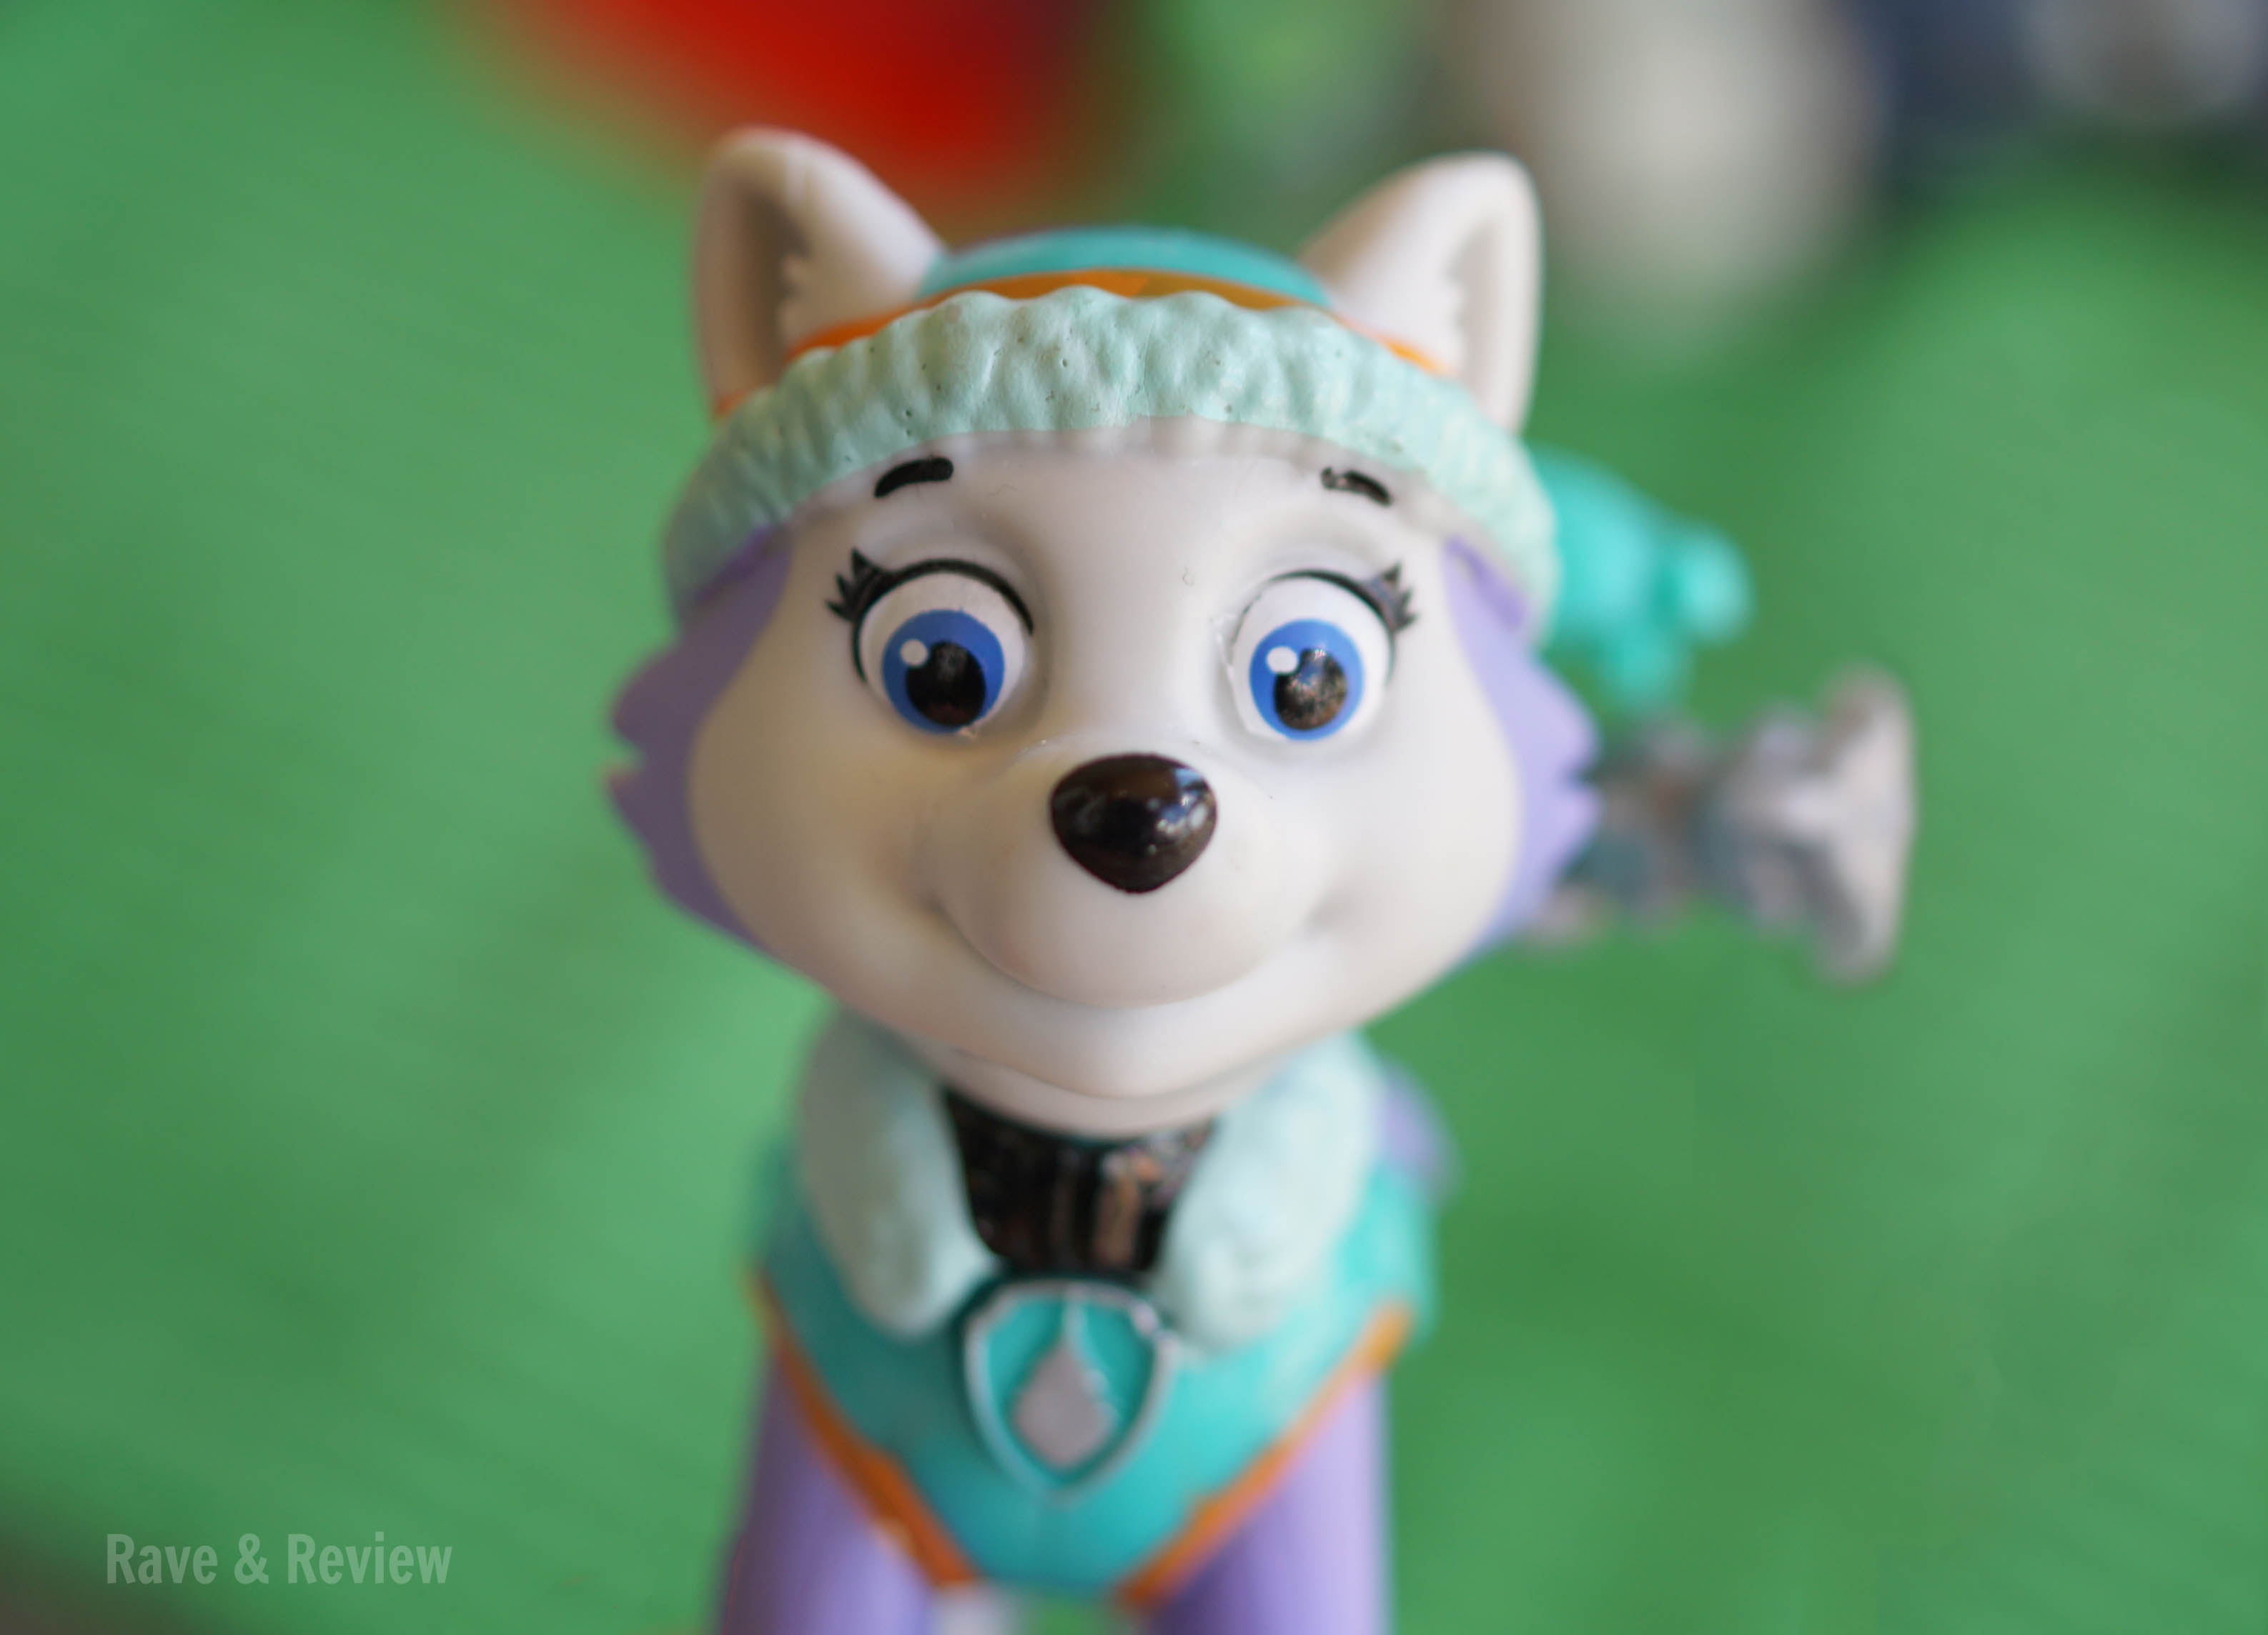 85 every parent has while watching Paw Patrol